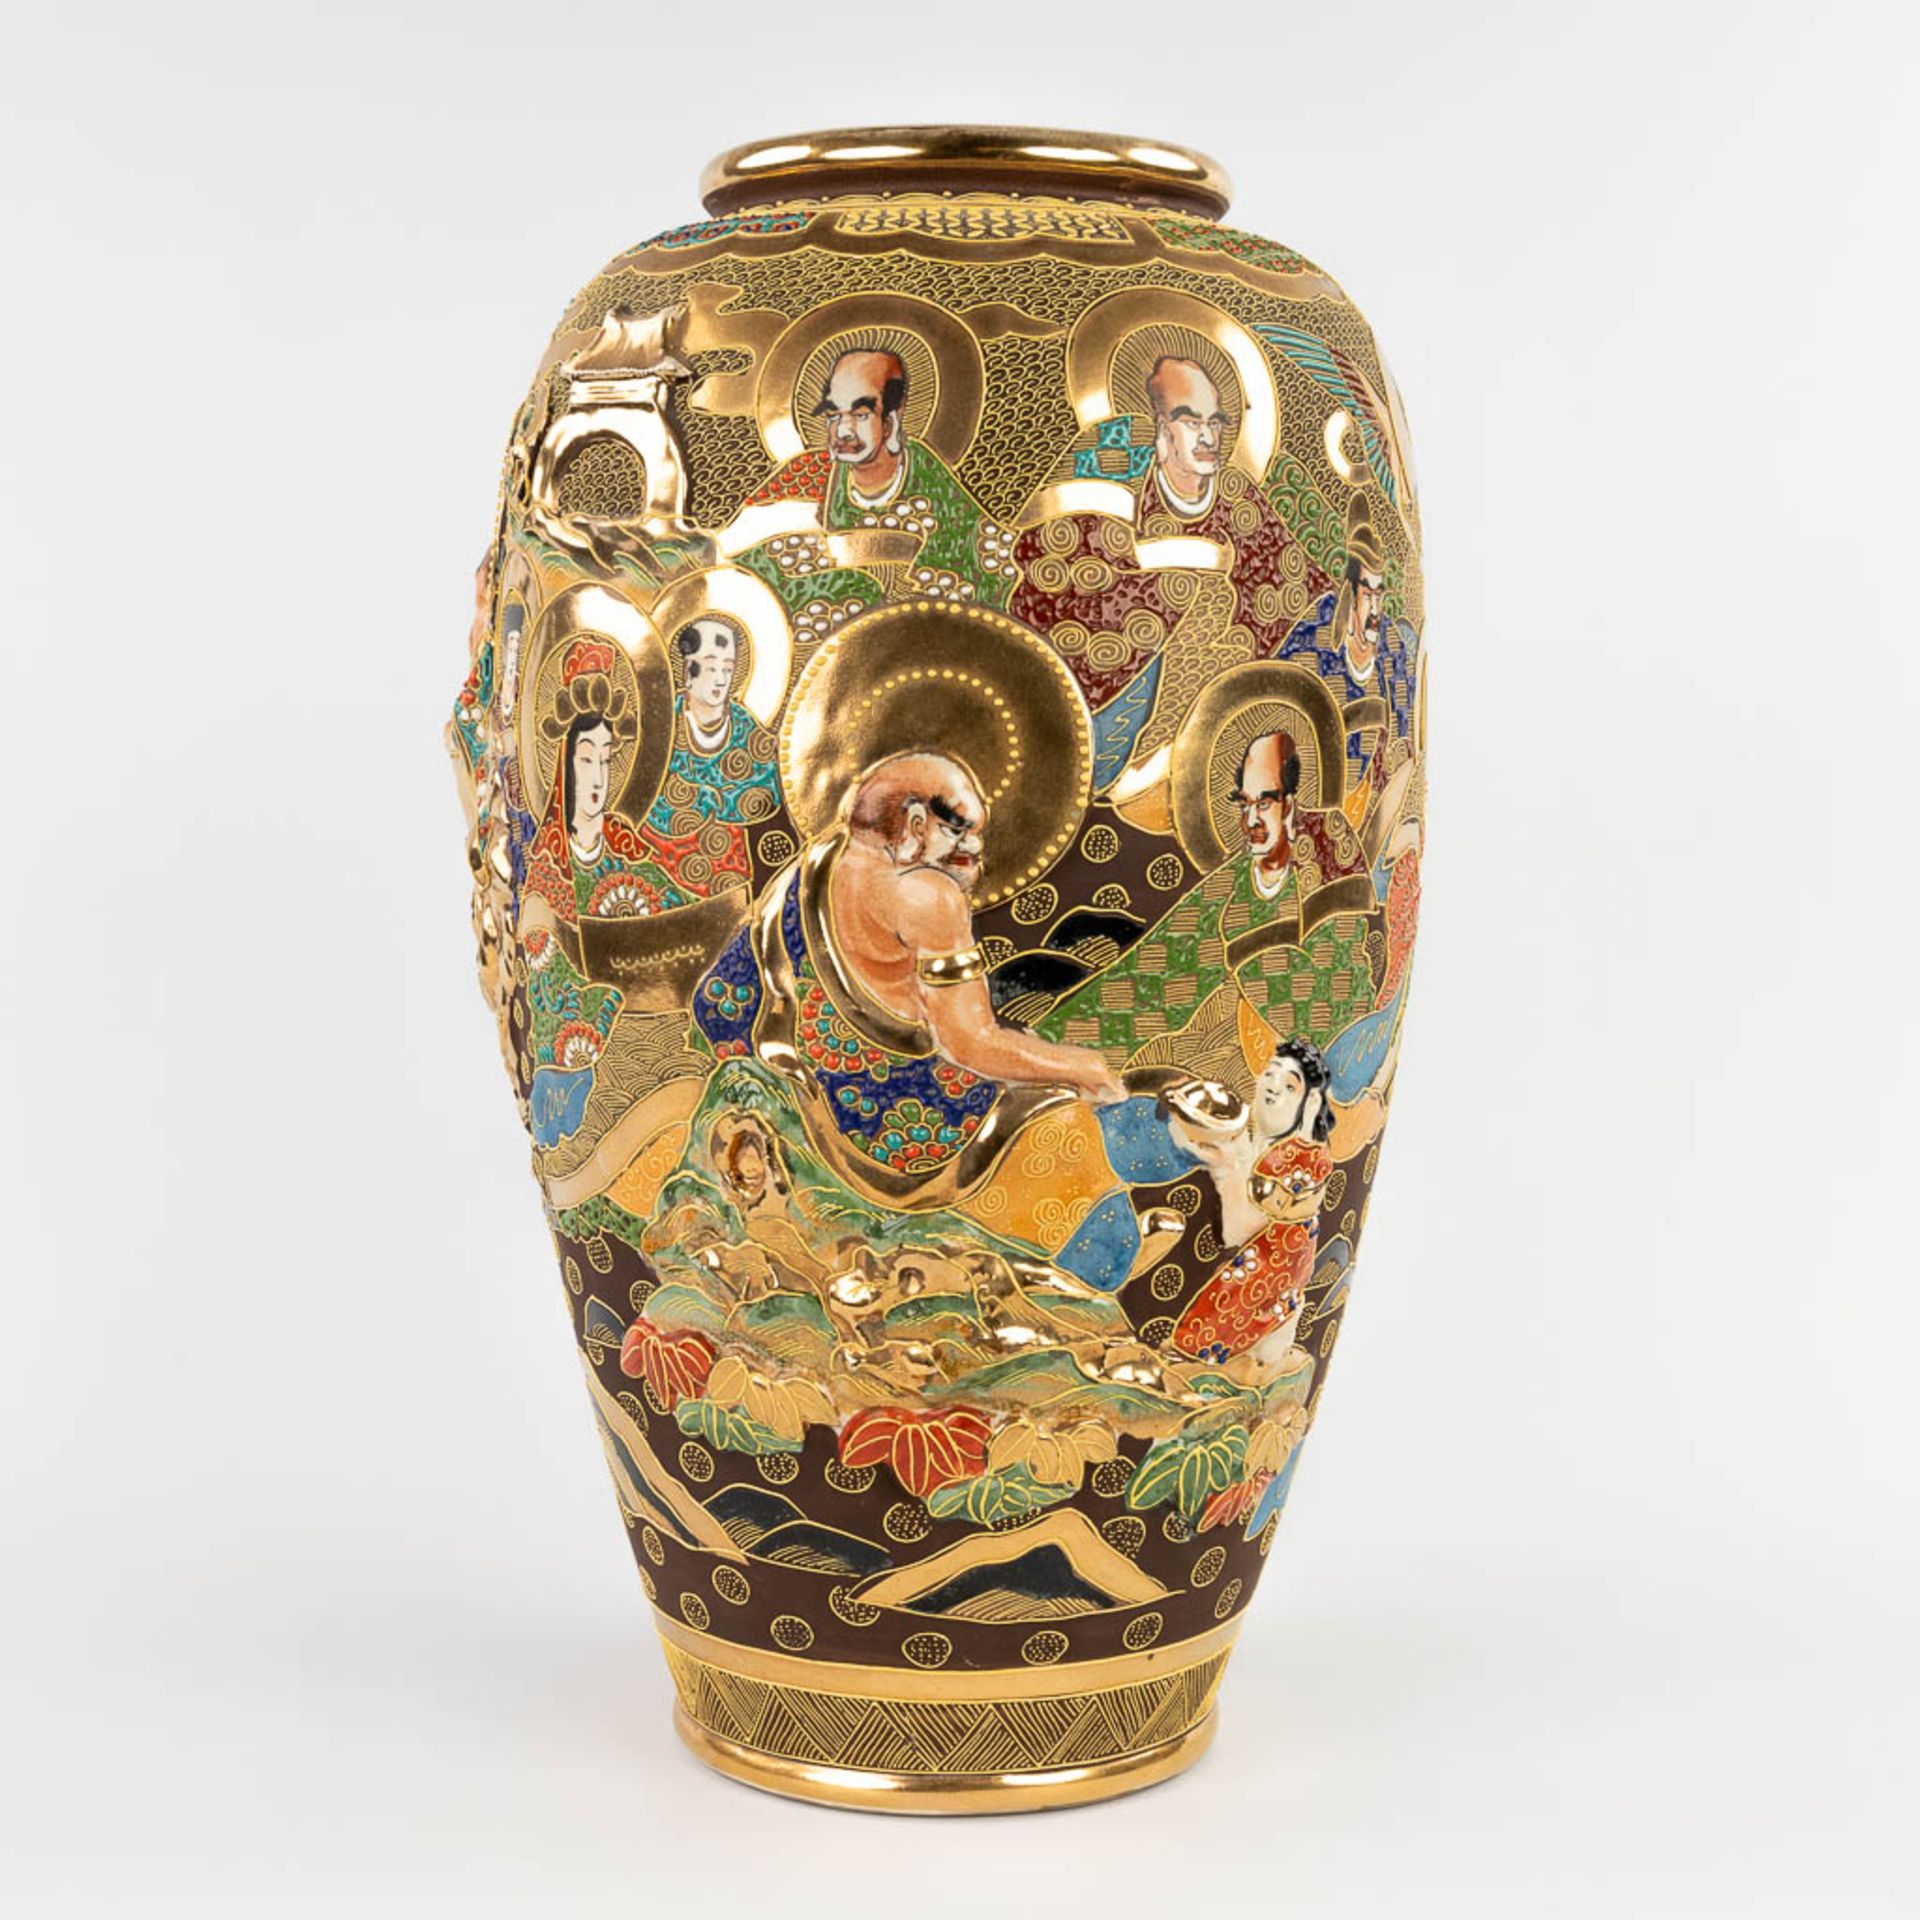 A large vase, Satsuma faience decorated with men and ladies, Japan. 20th C. (H:48 x D:28 cm) - Image 4 of 17